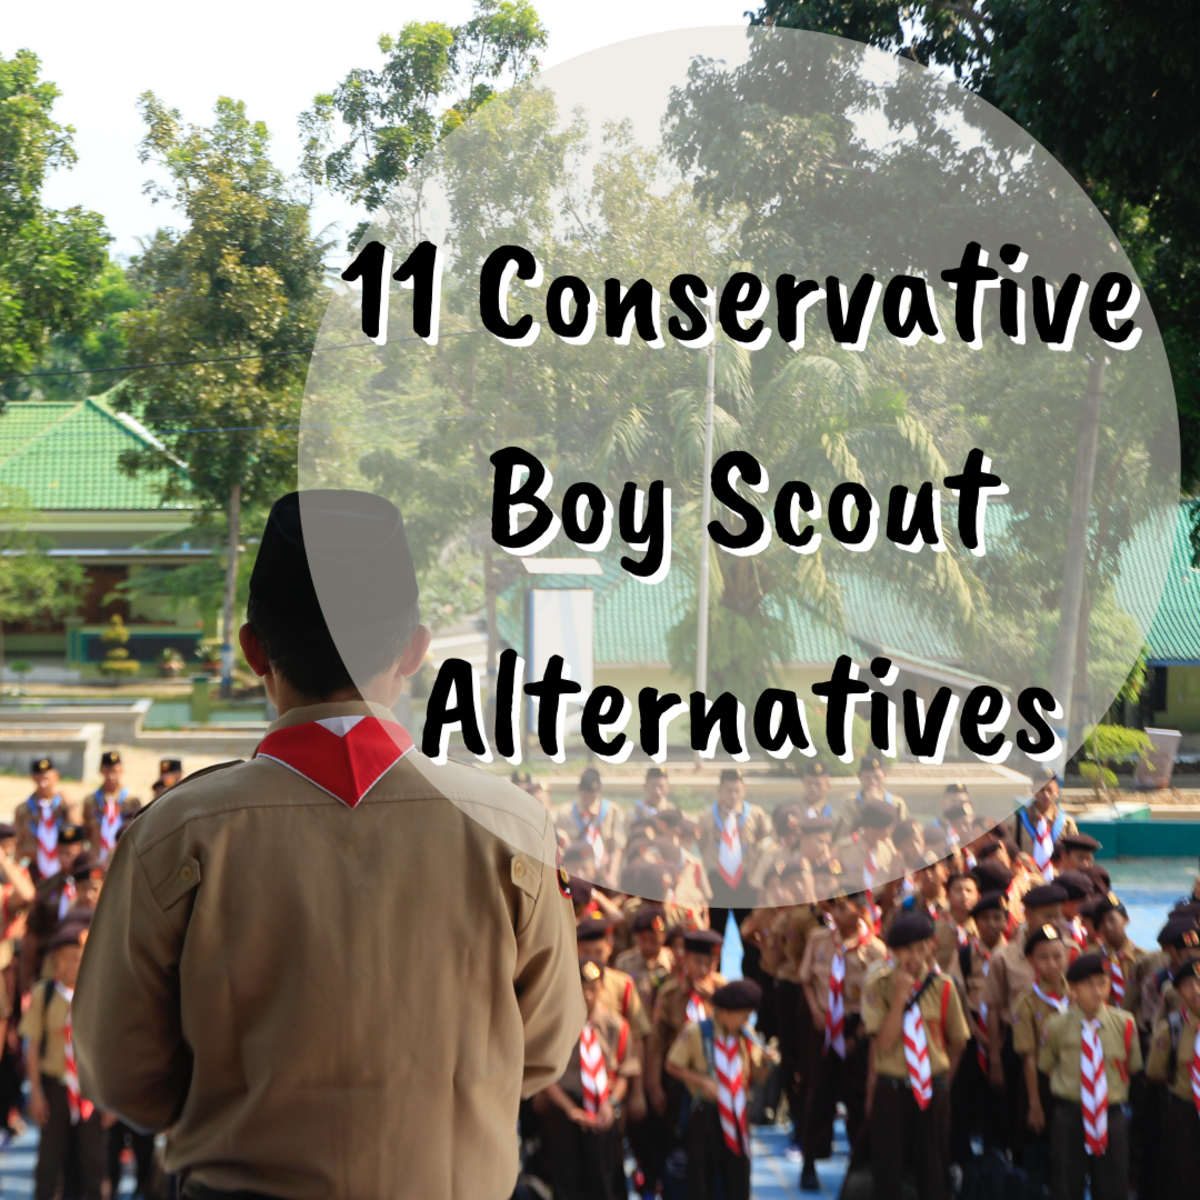 Look for a Boy Scouts alternative? Read on to discover 11 conservative alternatives.